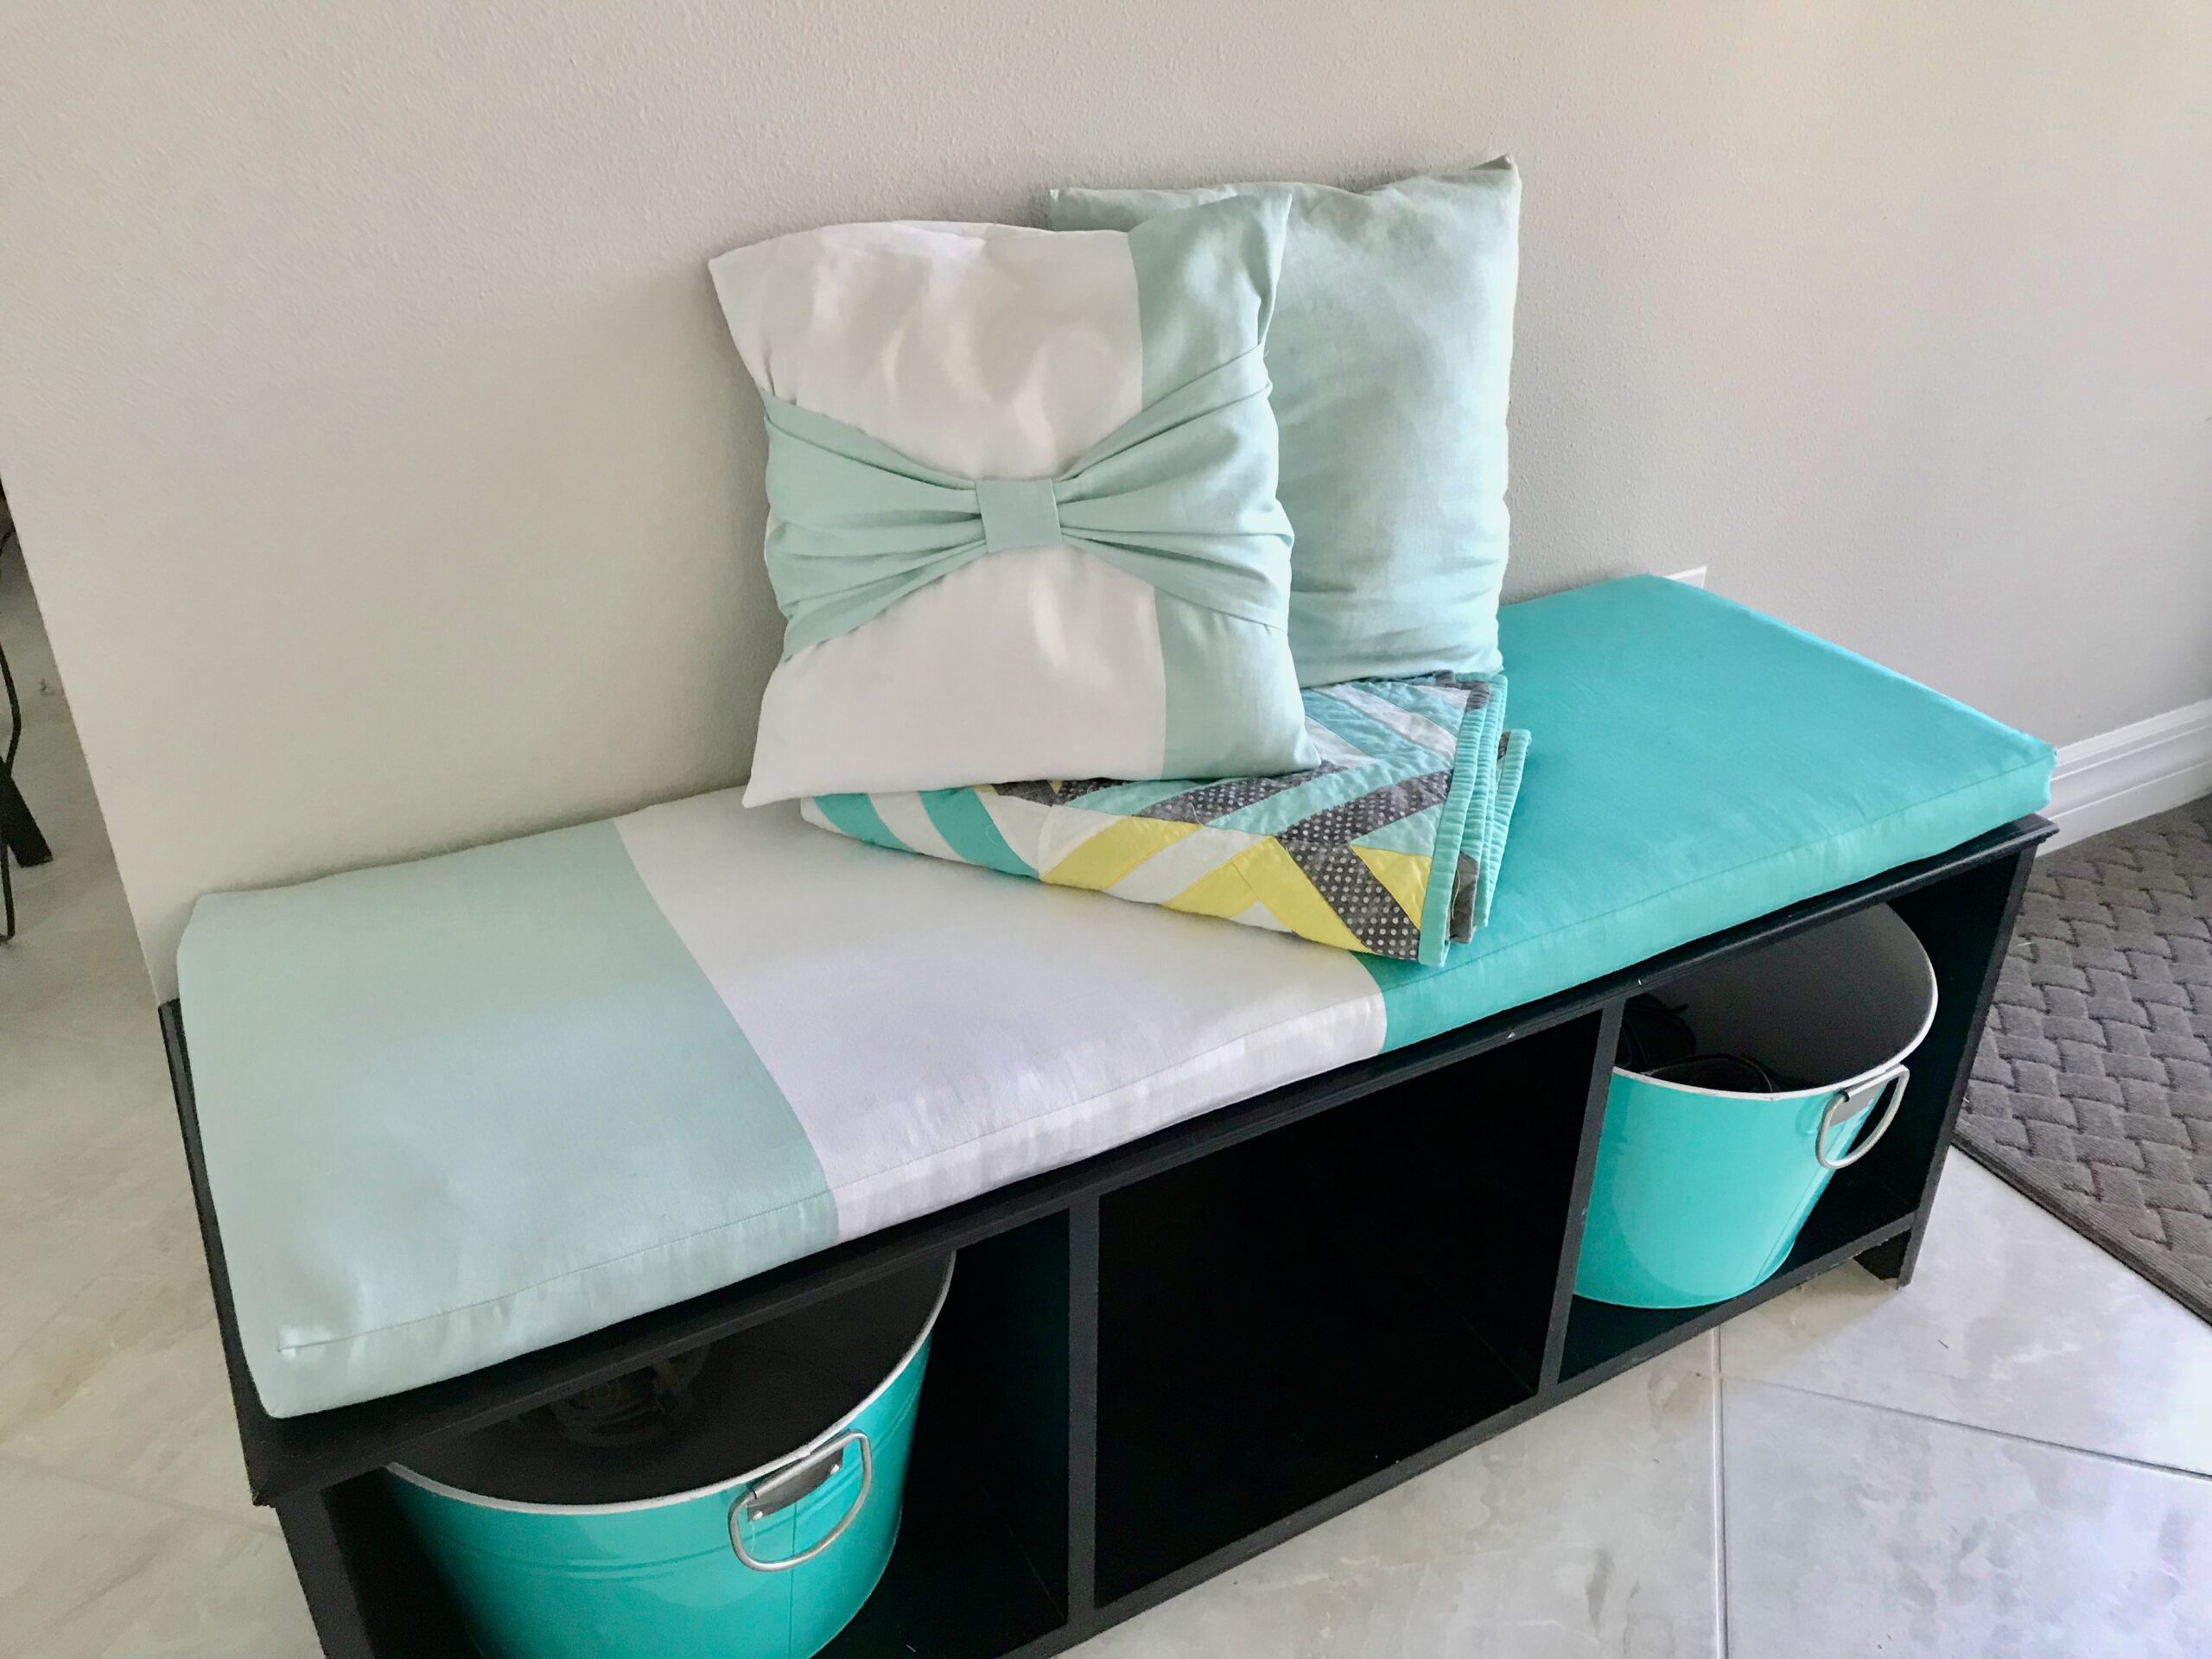 How to Sew a Bench Seat Cover - Peek-a-Boo Pages